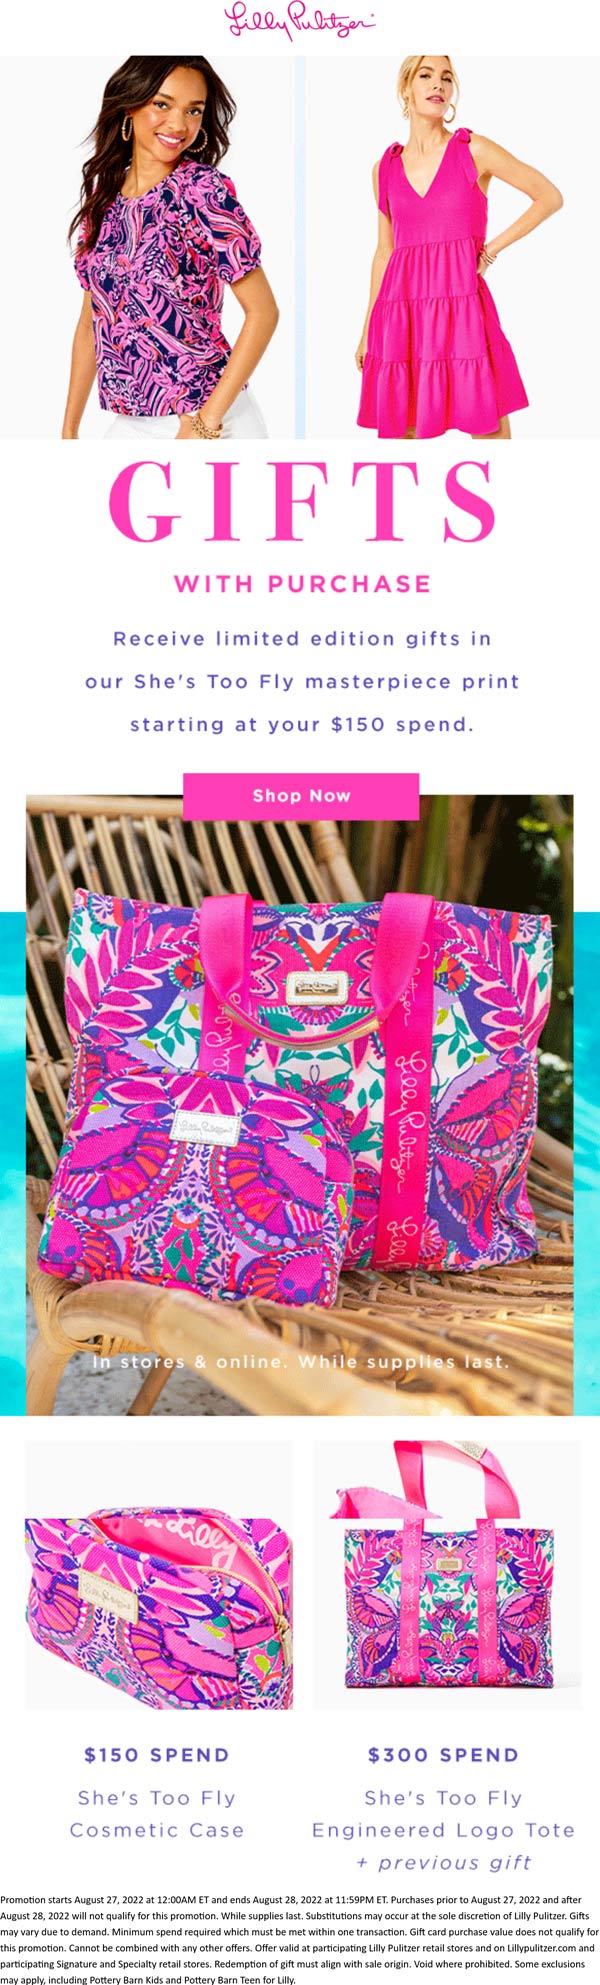 Lilly Pulitzer stores Coupon  Various free gifts on $150+ at Lilly Pulitzer, ditto online #lillypulitzer 